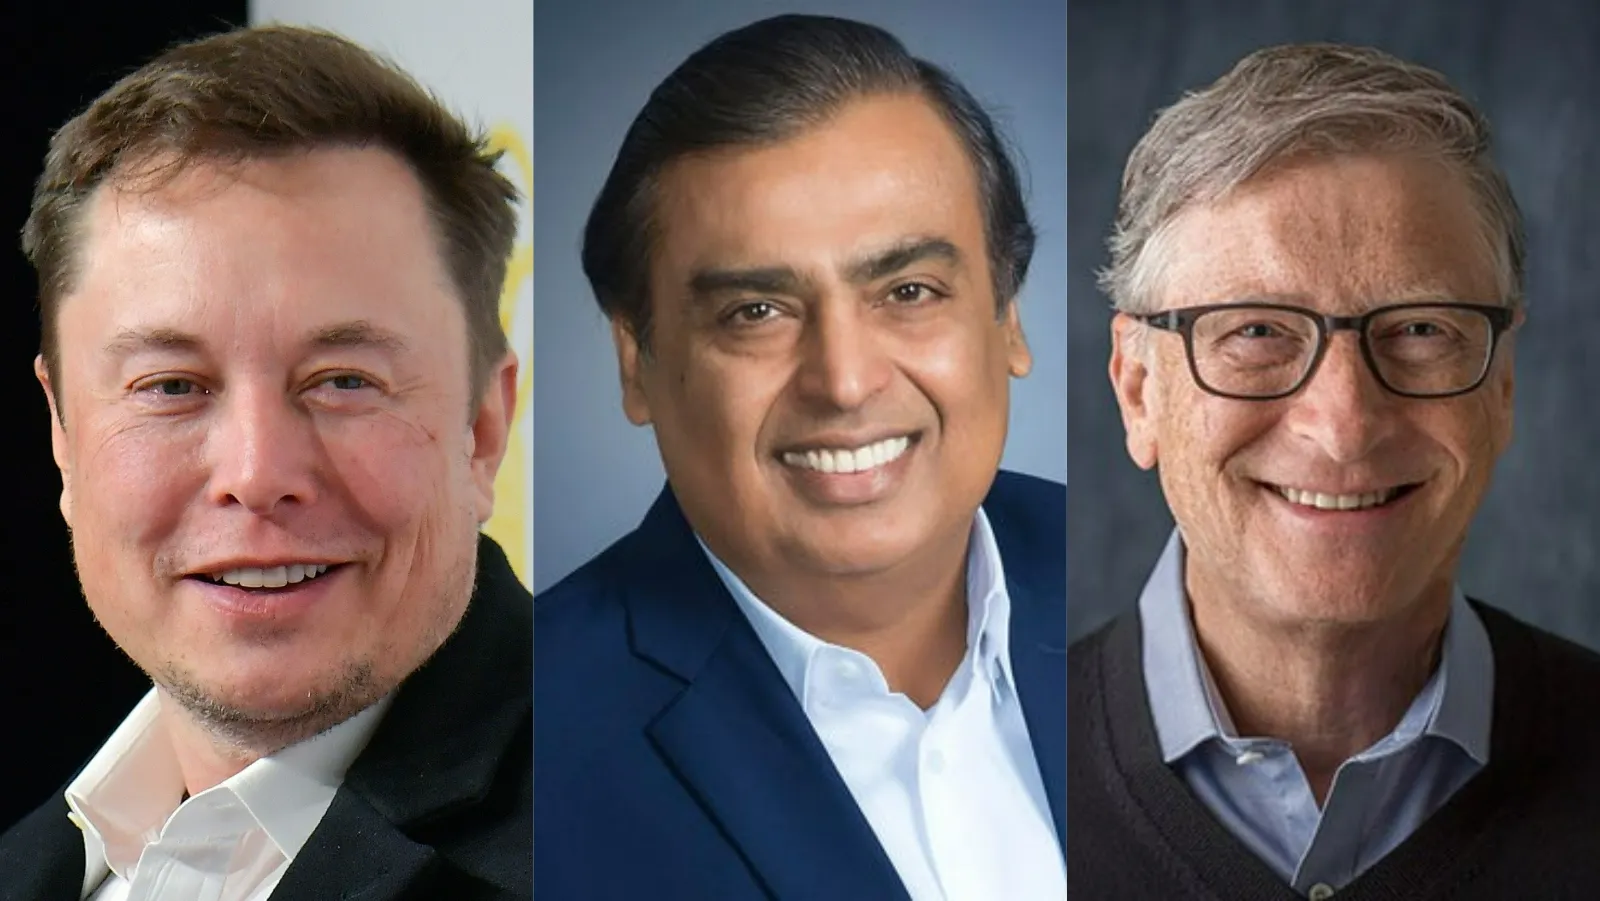 Top 10 Richest People in the World in 2022